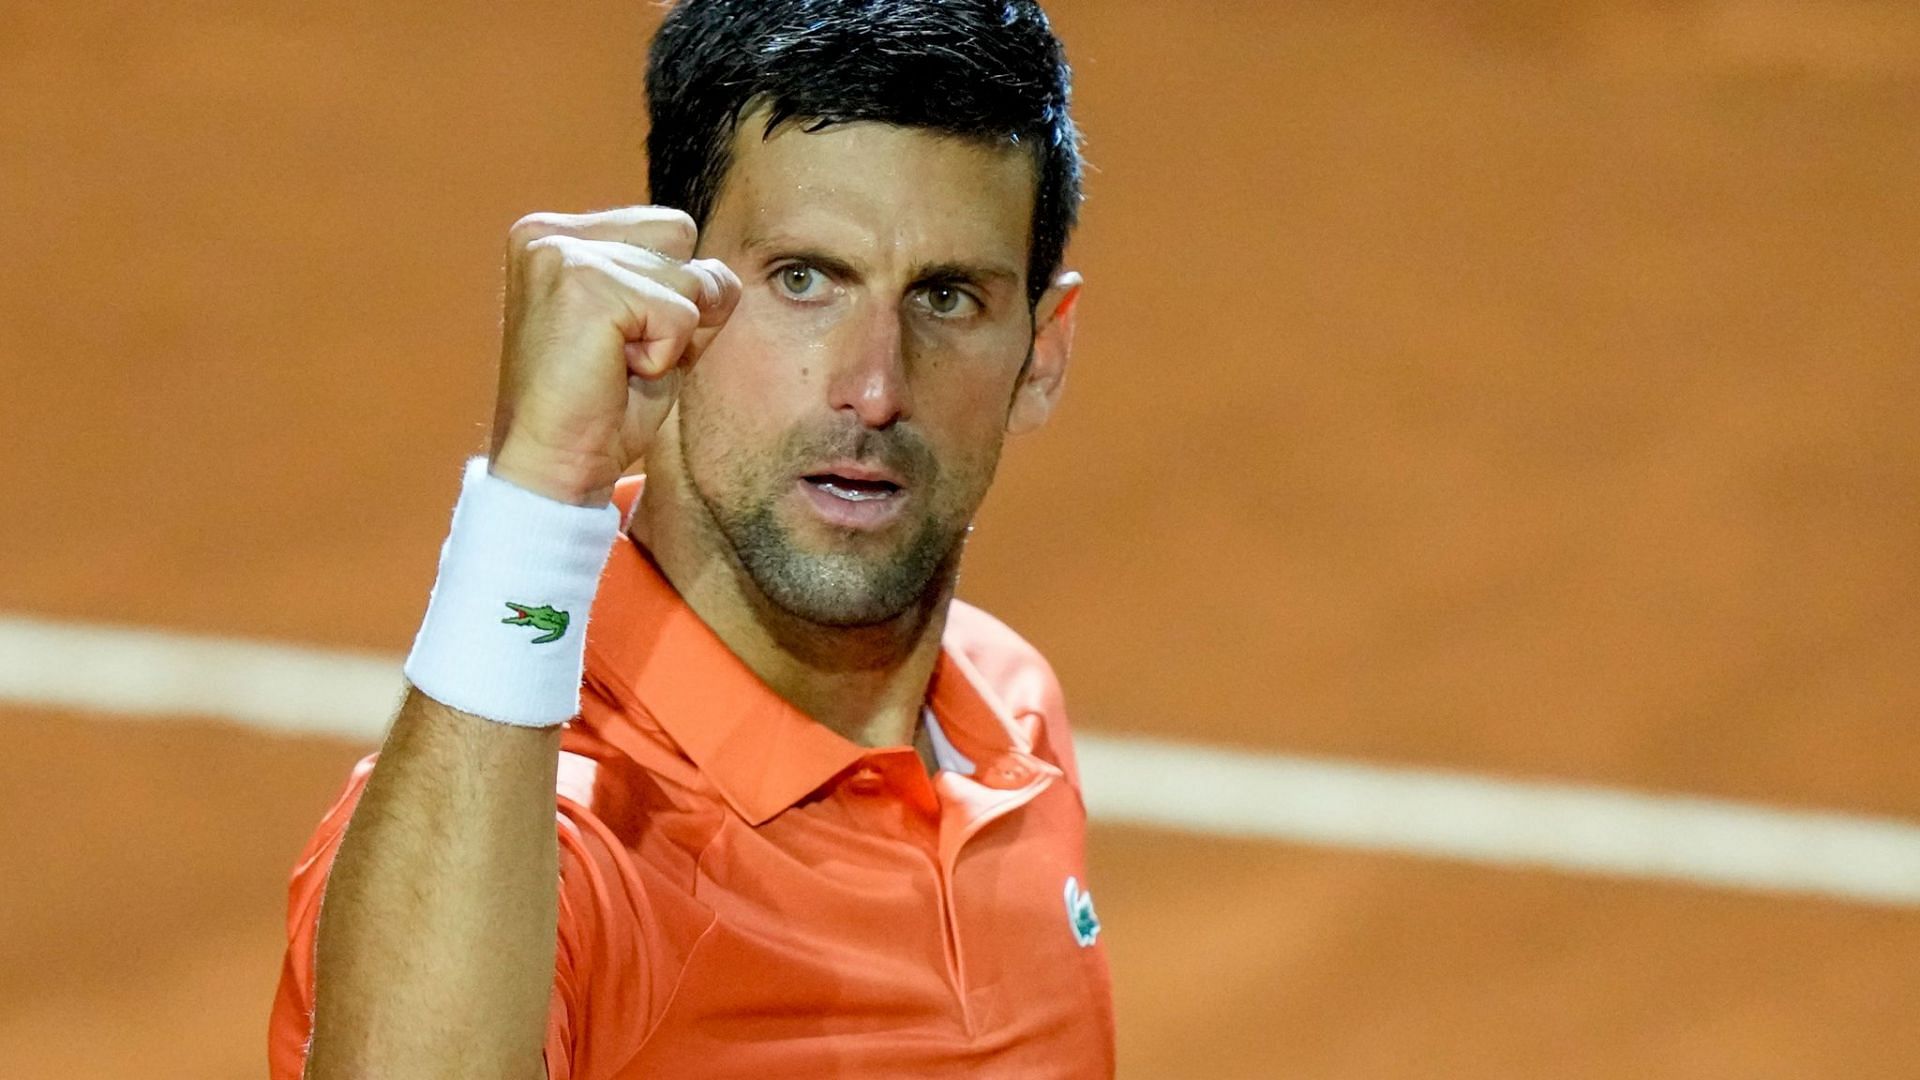 Djokovic&#039;s tendency to commit fewer errors than his opponents almost always acts as an advantage